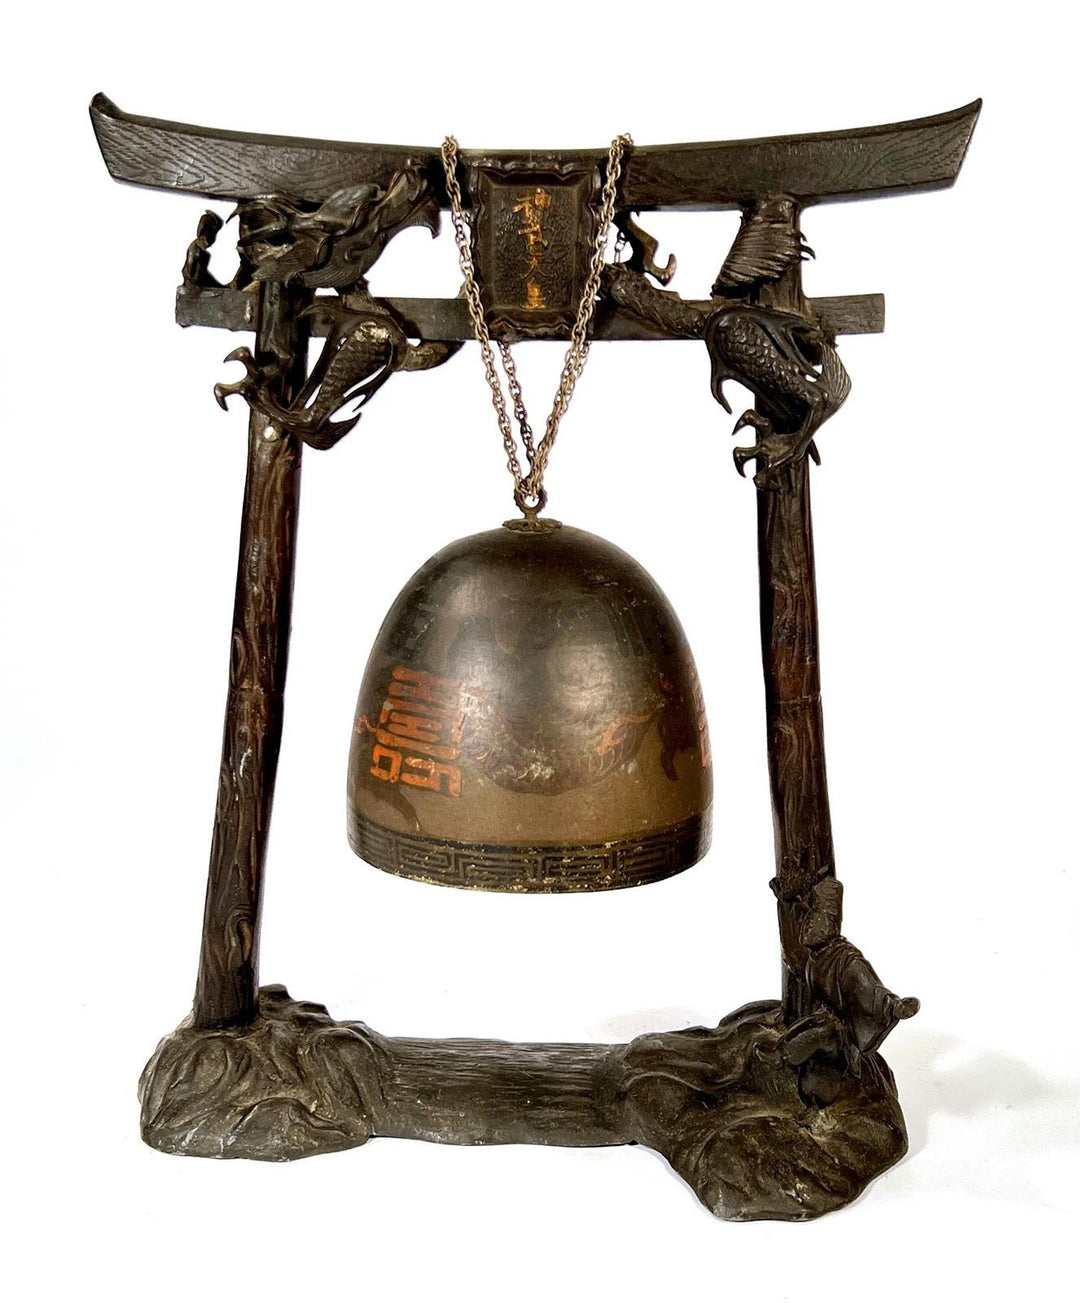 Early 20th Century Japanese Temple Gong with Dragon